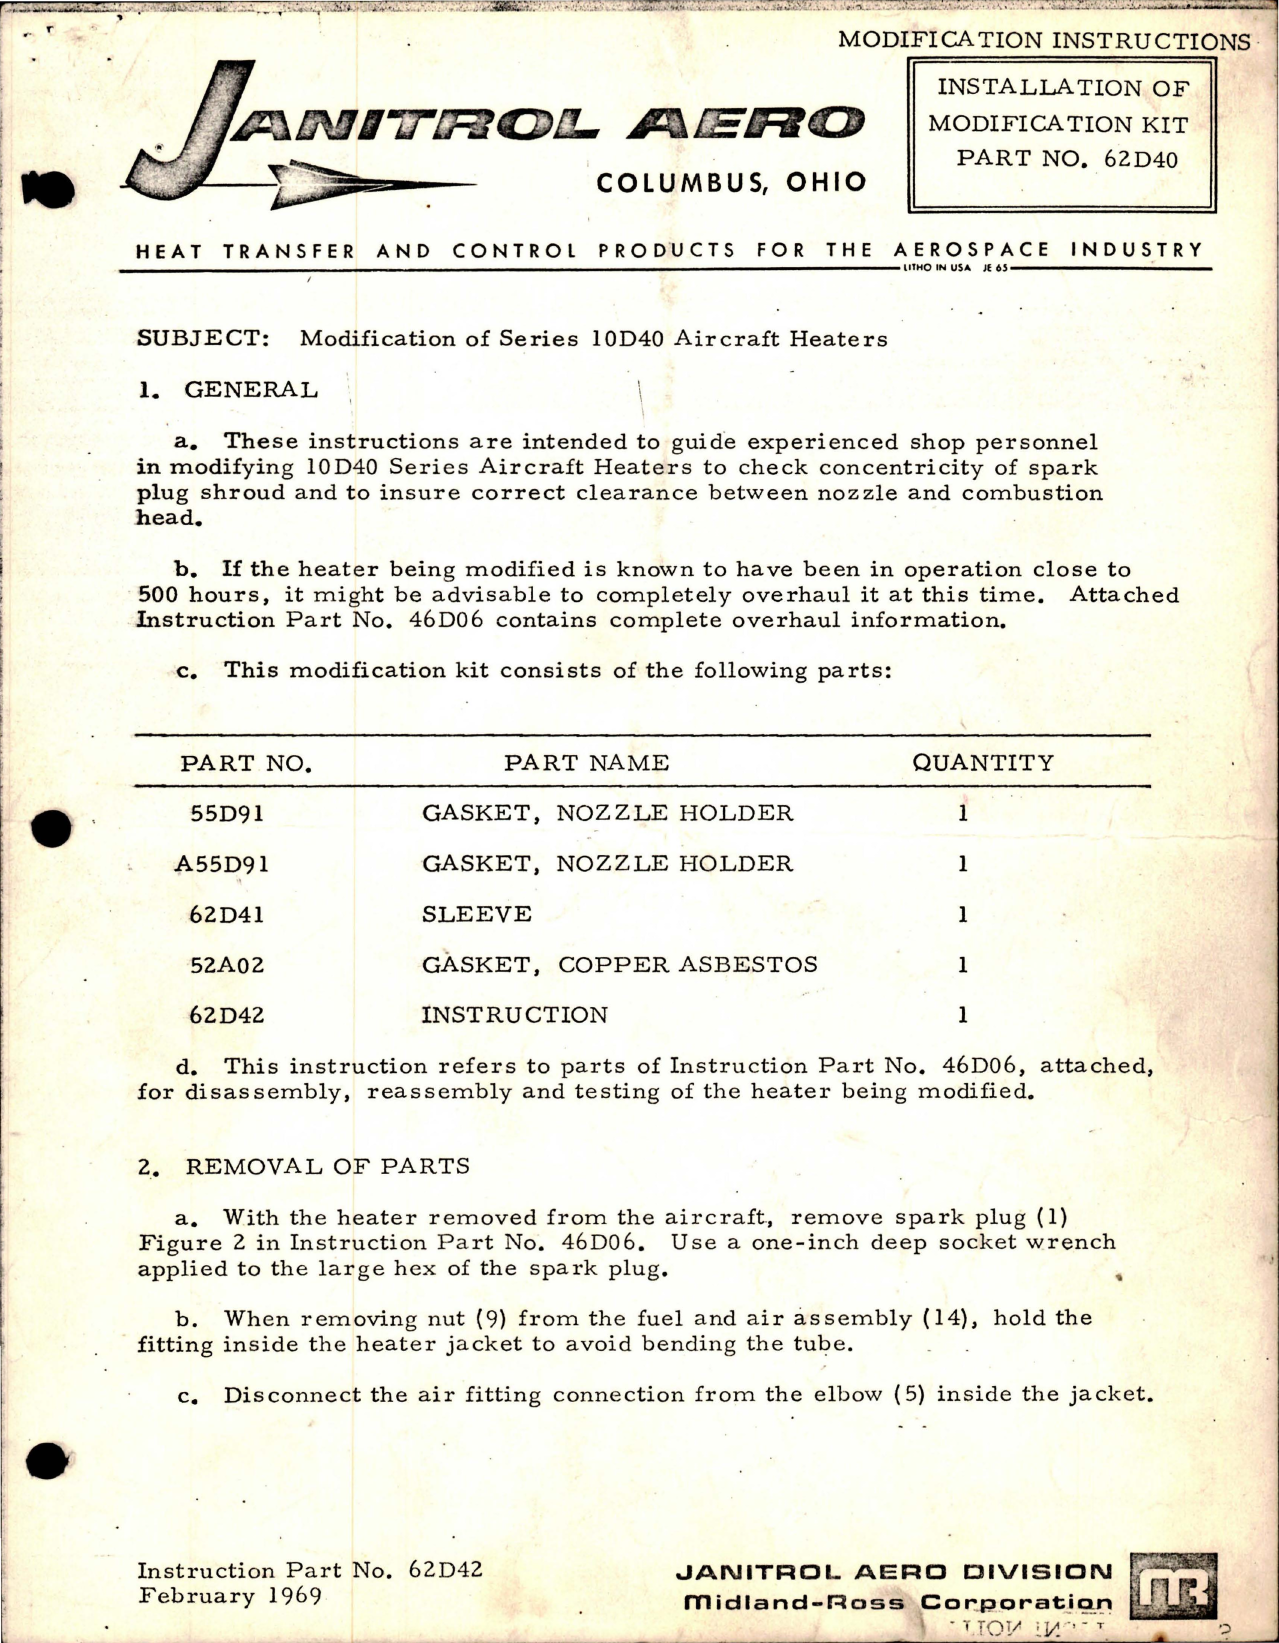 Sample page 1 from AirCorps Library document: Modification Instructions for Installation of Modification Kit -  Part 62D42